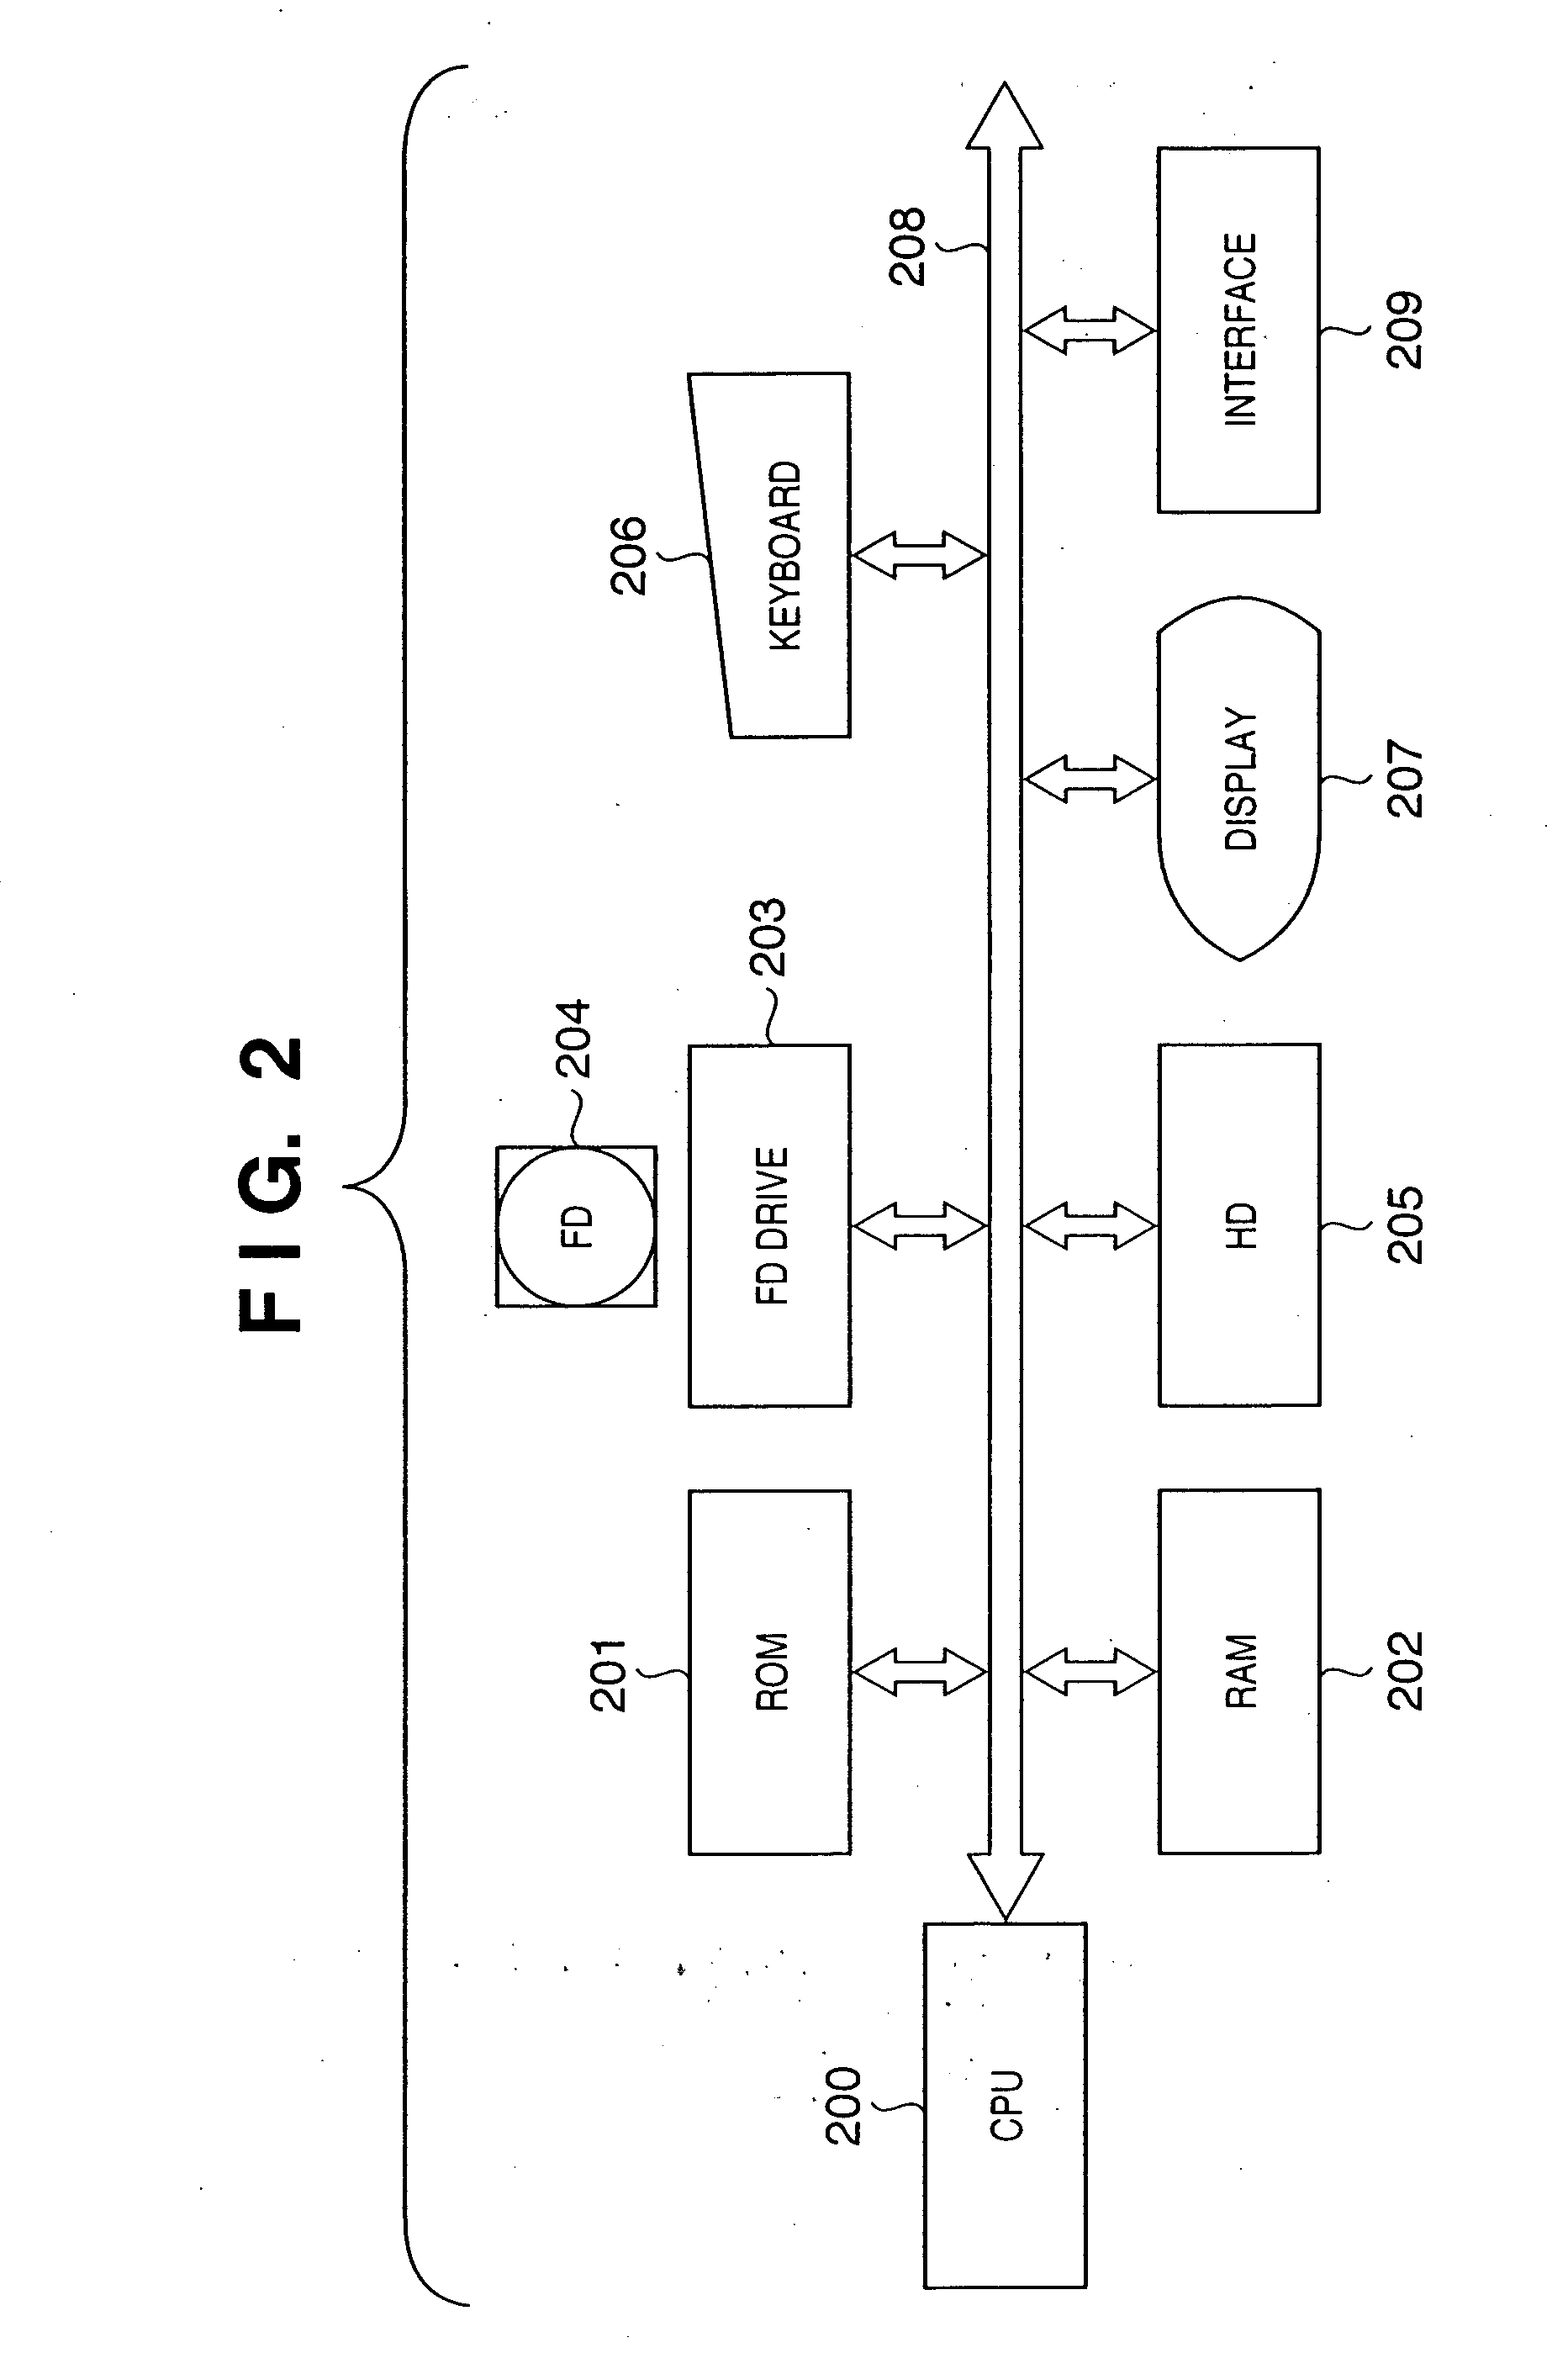 Method and apparatus for executing load distributed printing